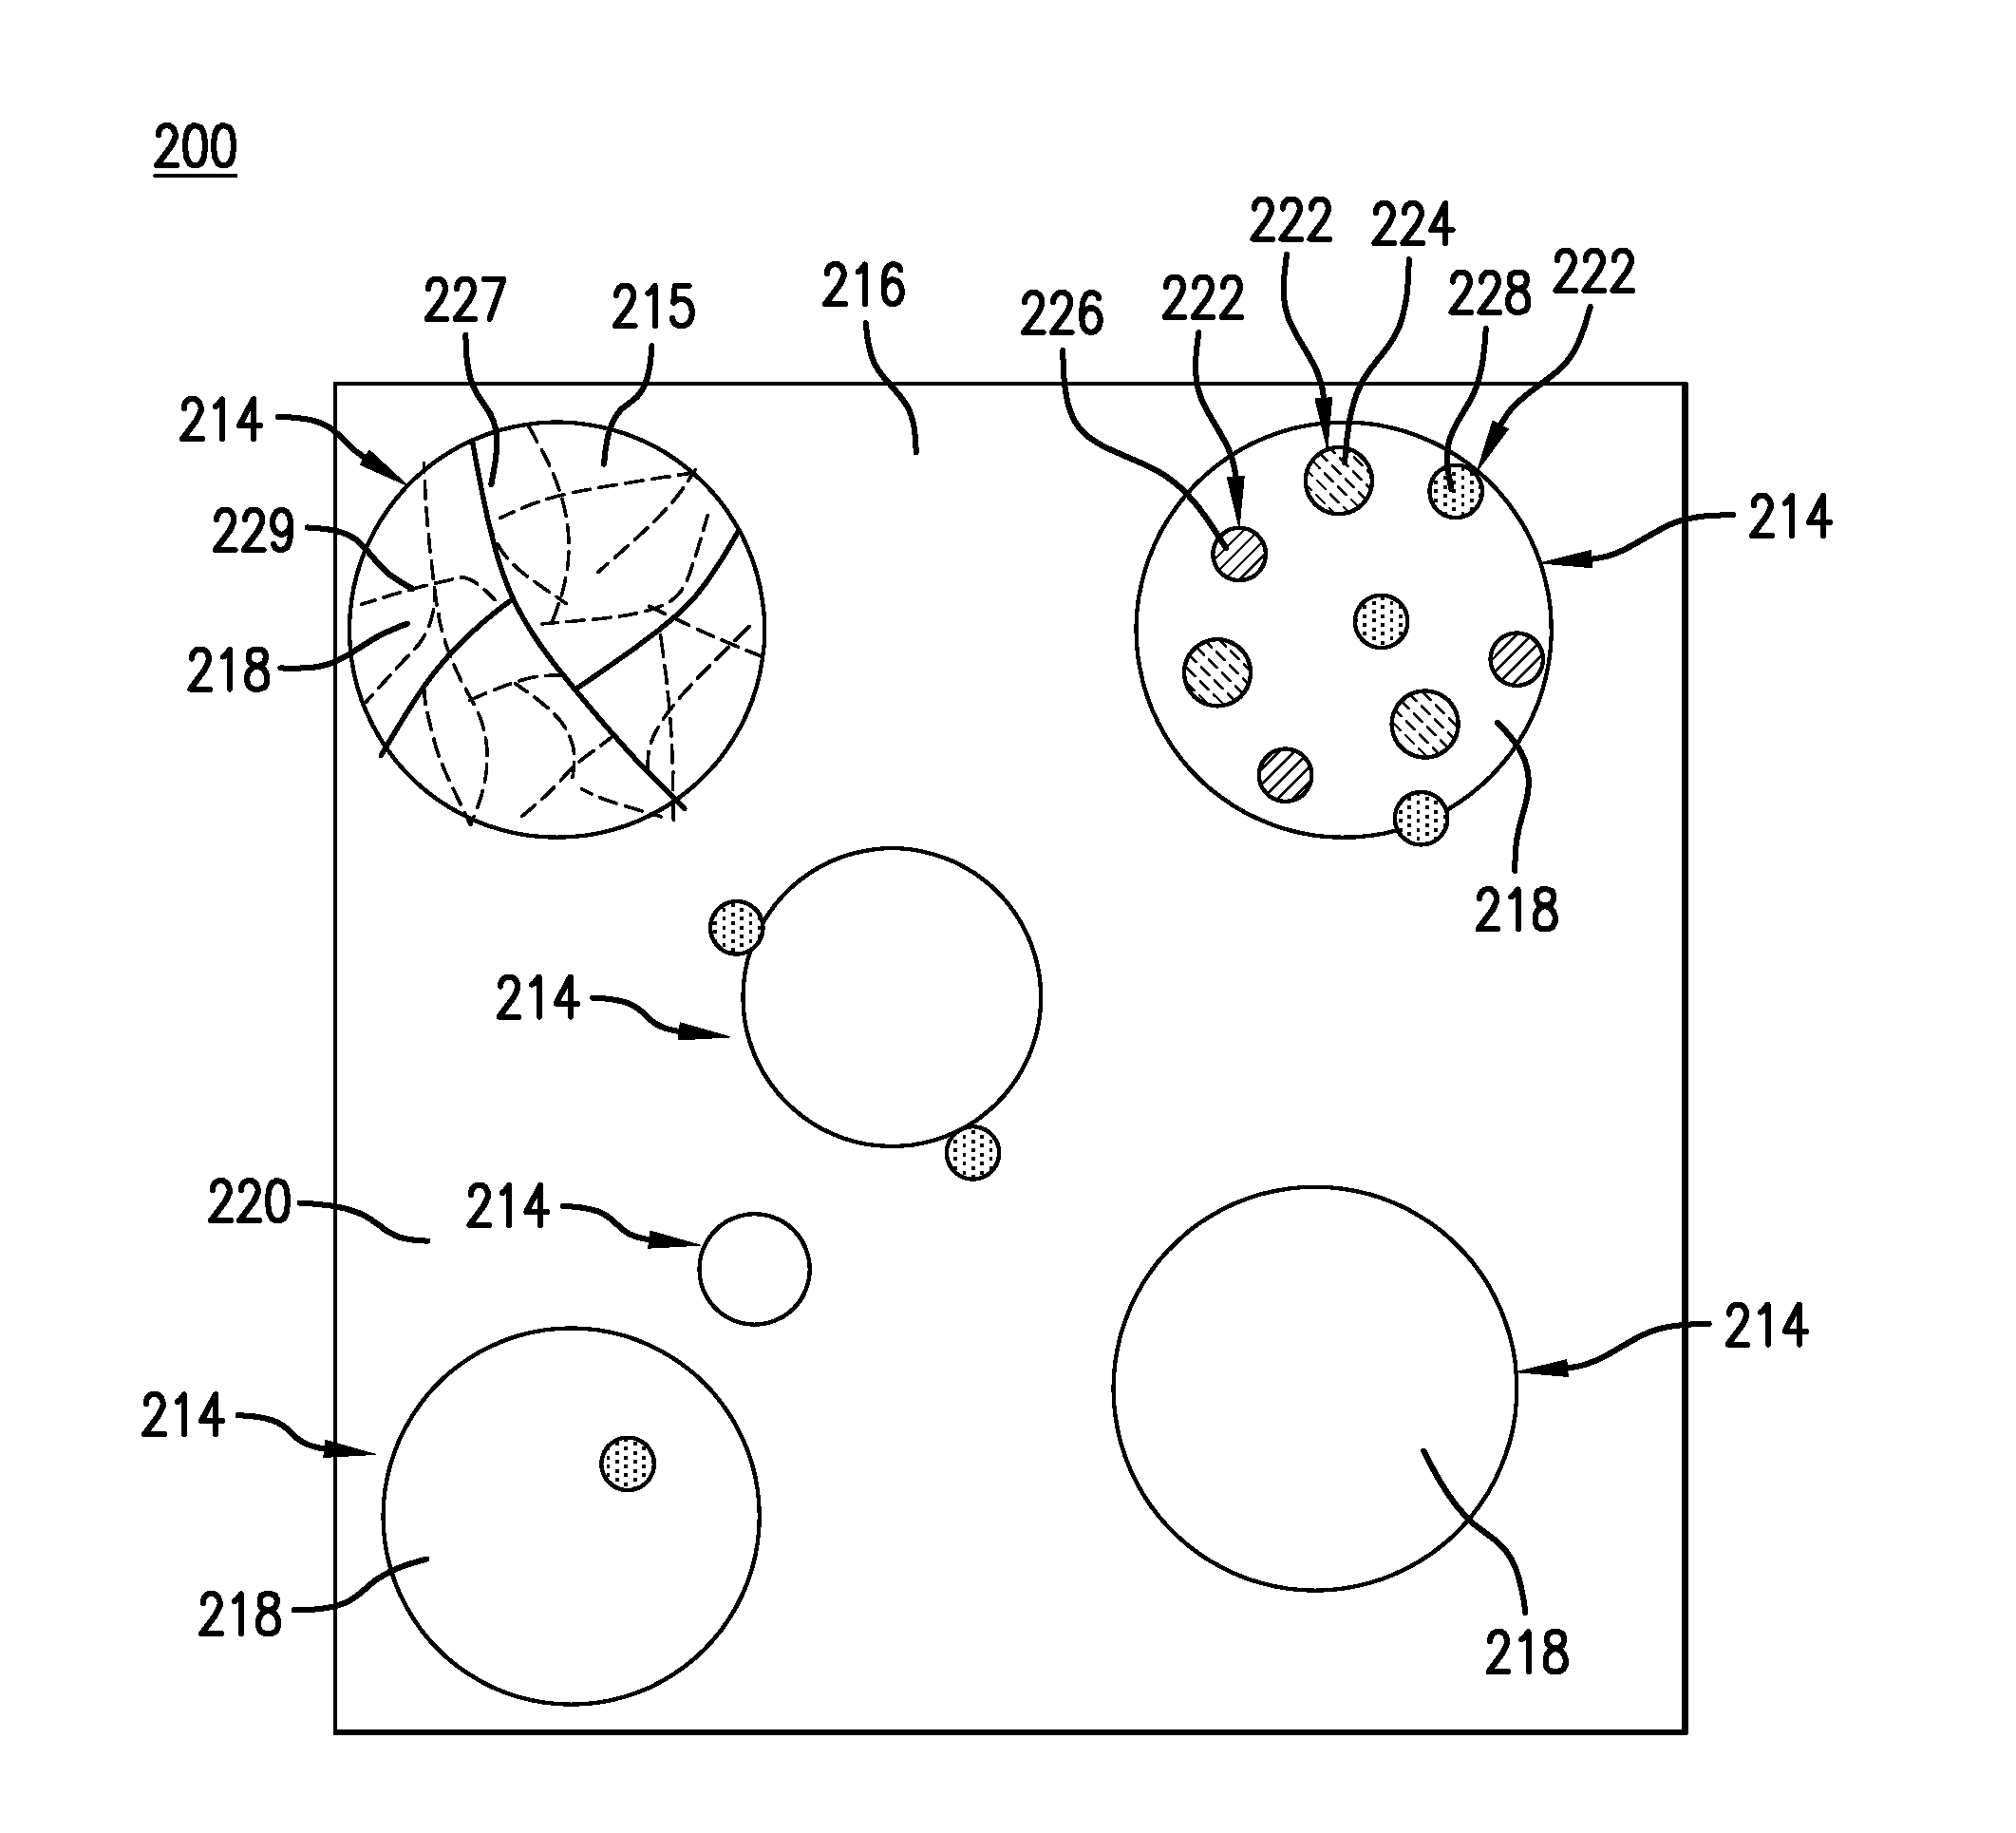 Ferrous disintegrable powder compact, method of making and article of same